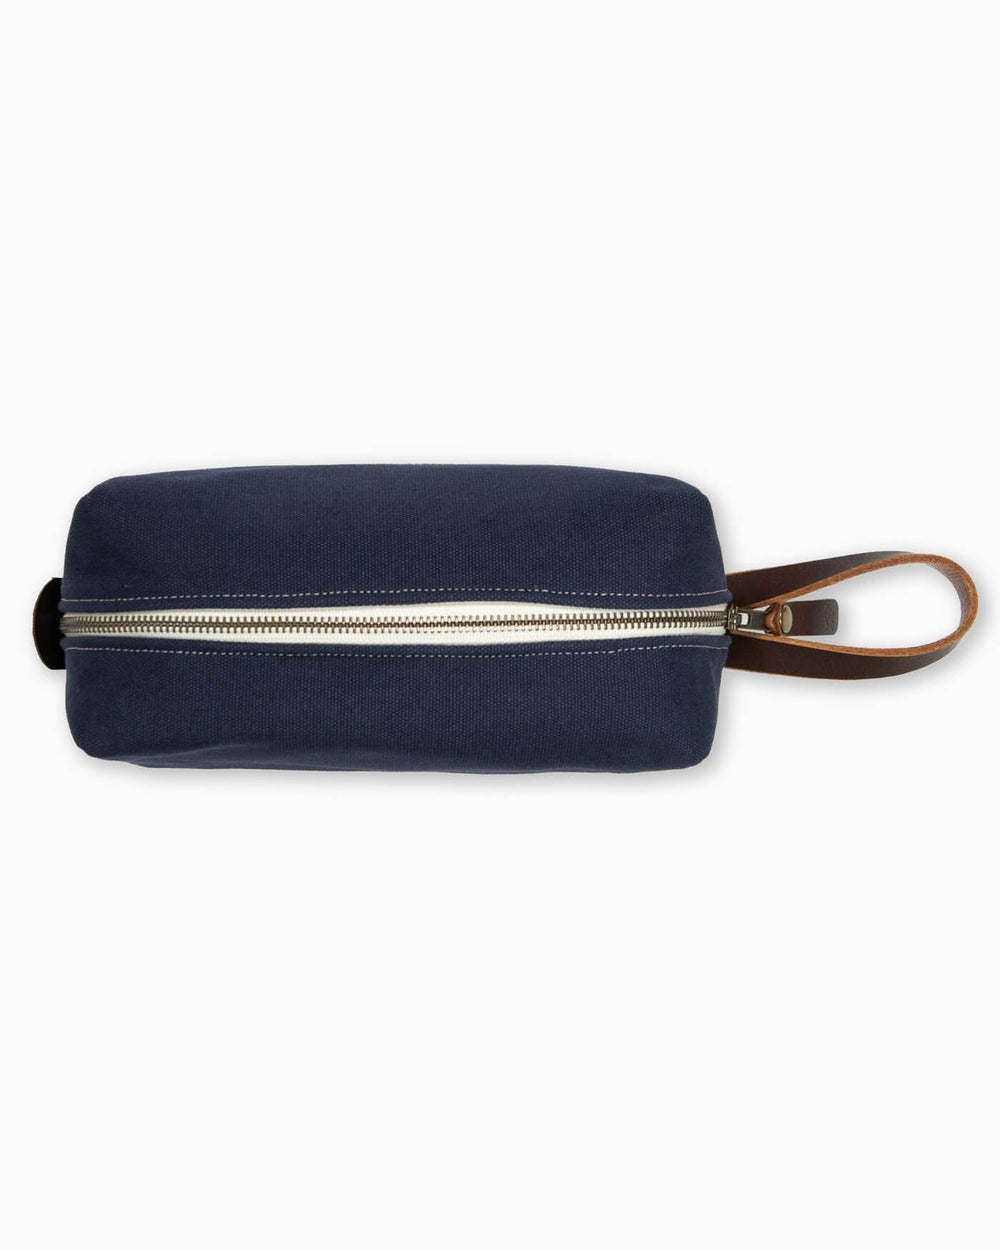 The detail view of the Southern Tide Navy Dopp Kit by Southern Tide - Navy